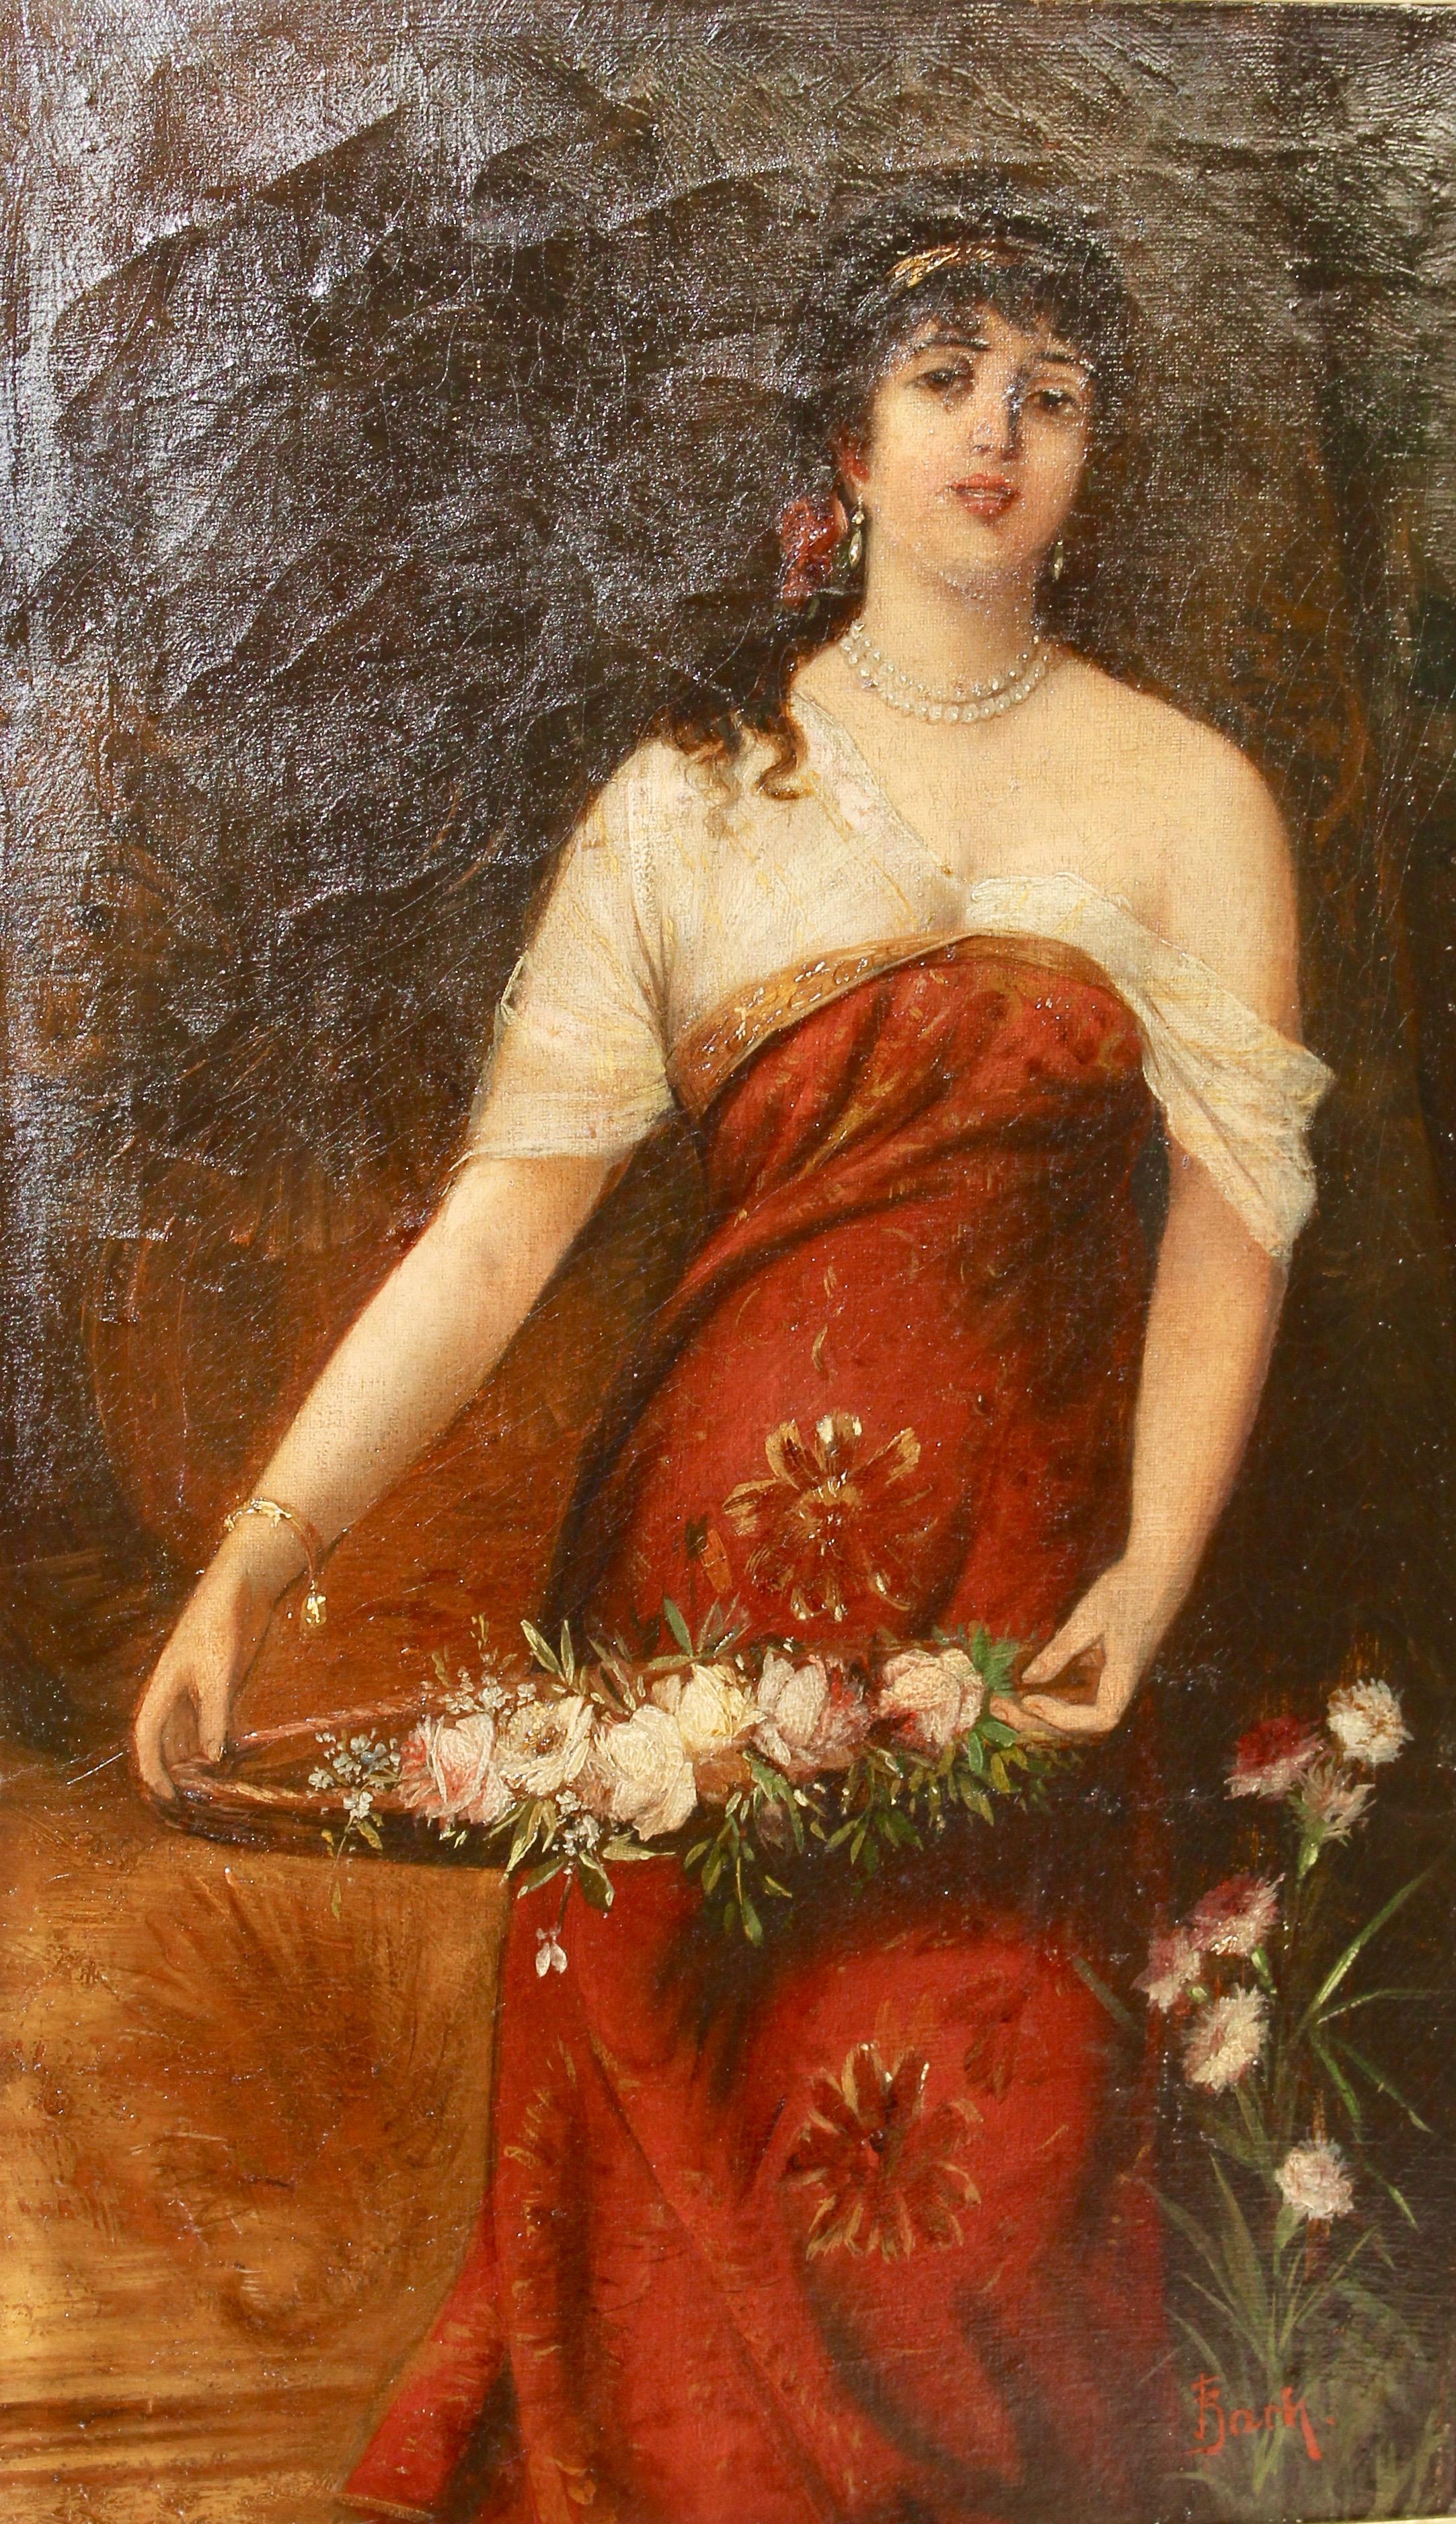 Painting, 19th century, oil on canvas, "Young woman with flower basket"